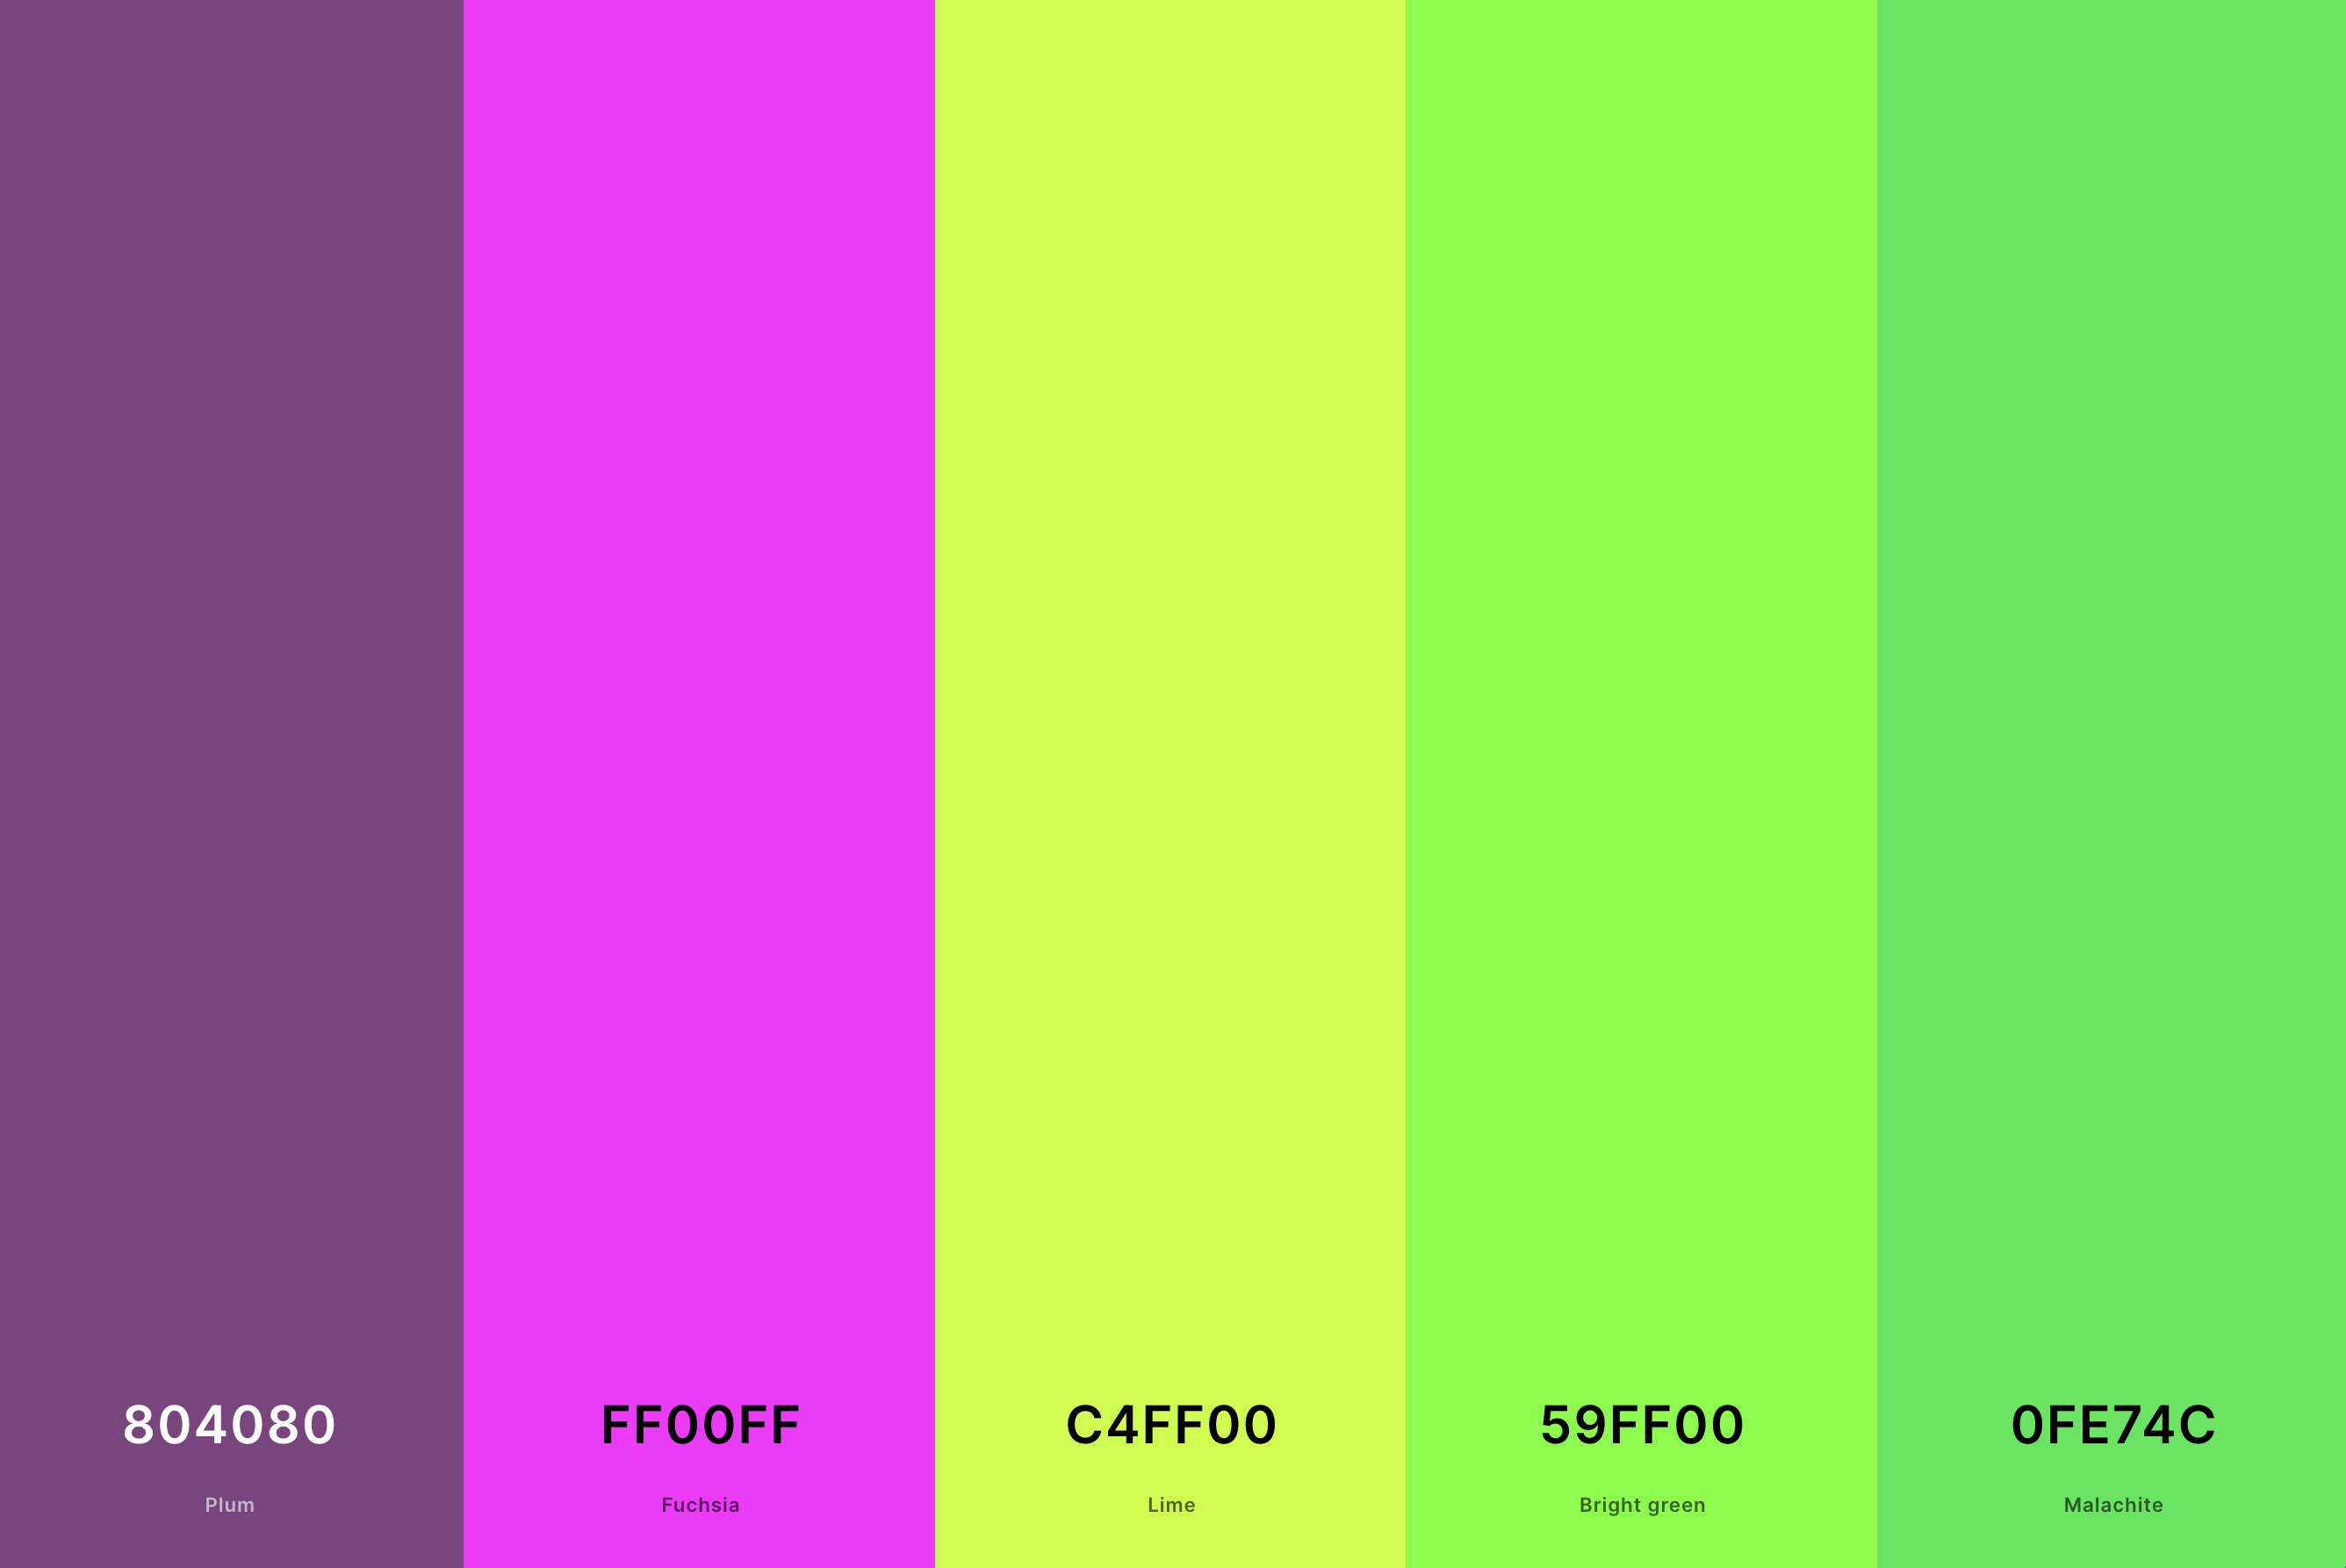 15. Magenta And Green Color Palette Color Palette with Plum (Hex #804080) + Magenta (Hex #FF00FF) + Lime (Hex #C4FF00) + Bright Green (Hex #59FF00) + Malachite (Hex #0FE74C) Color Palette with Hex Codes